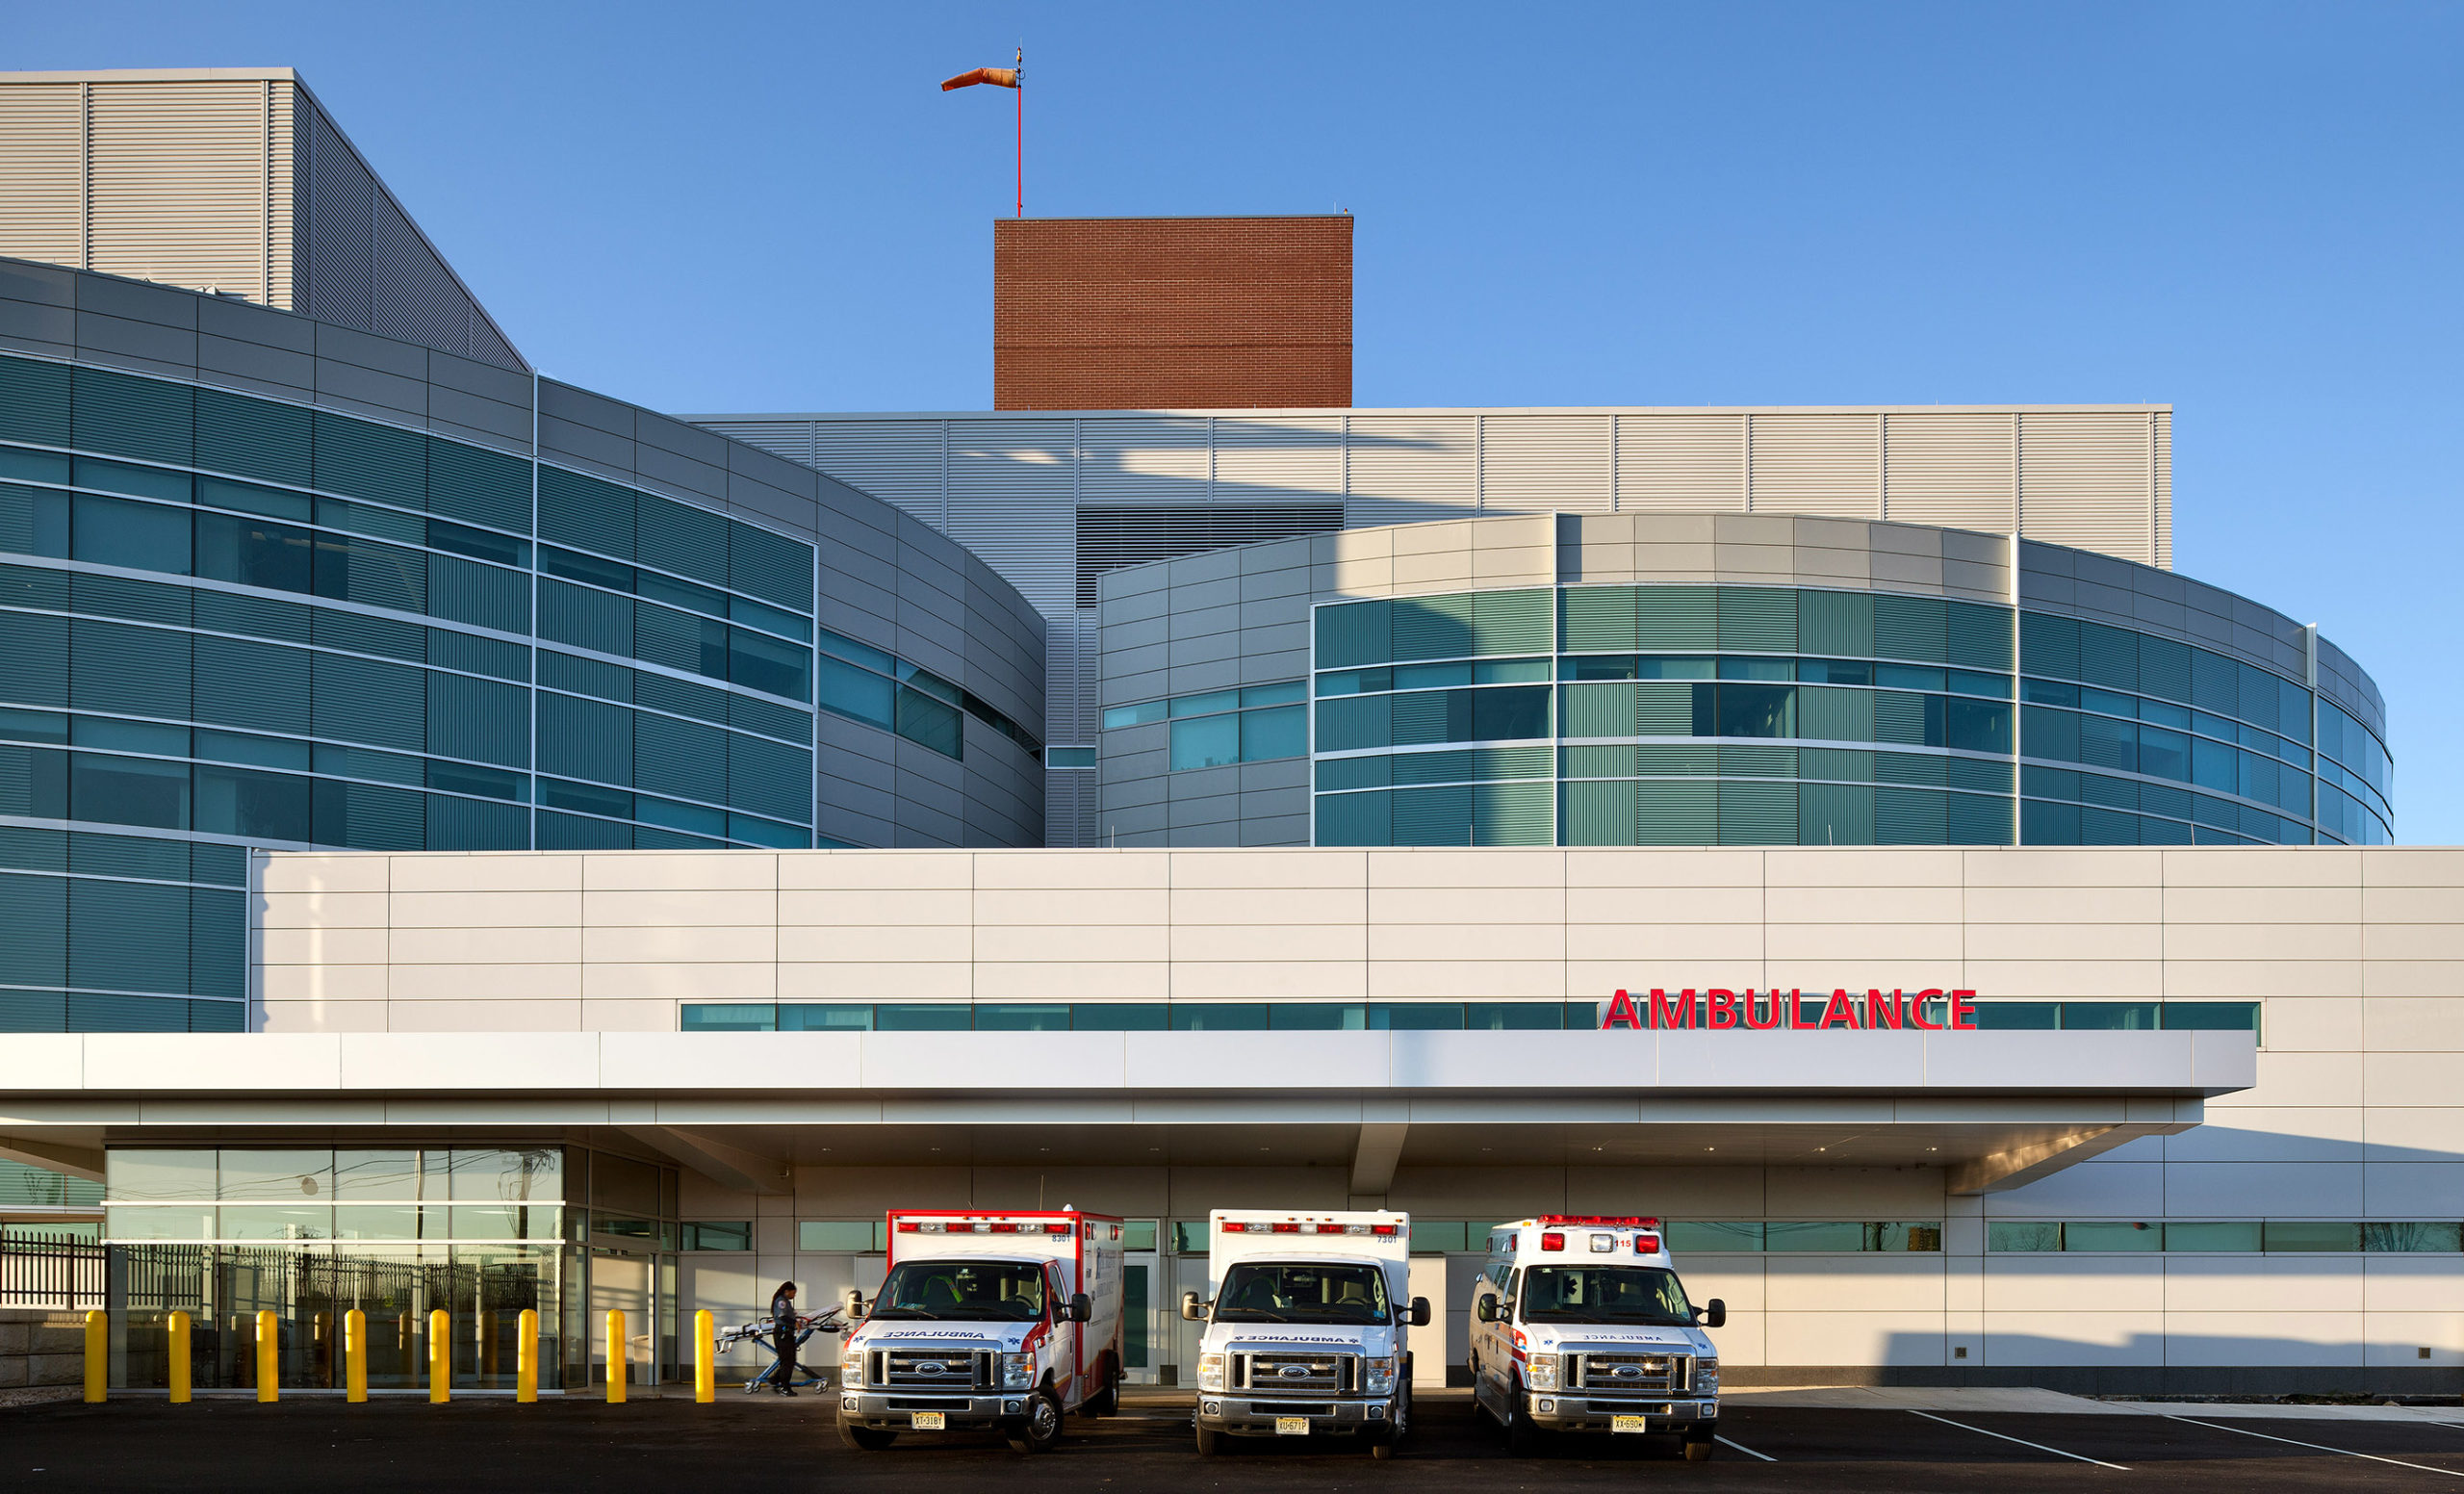 Emergency department area features an ambulance and mobile intensive care vestibule